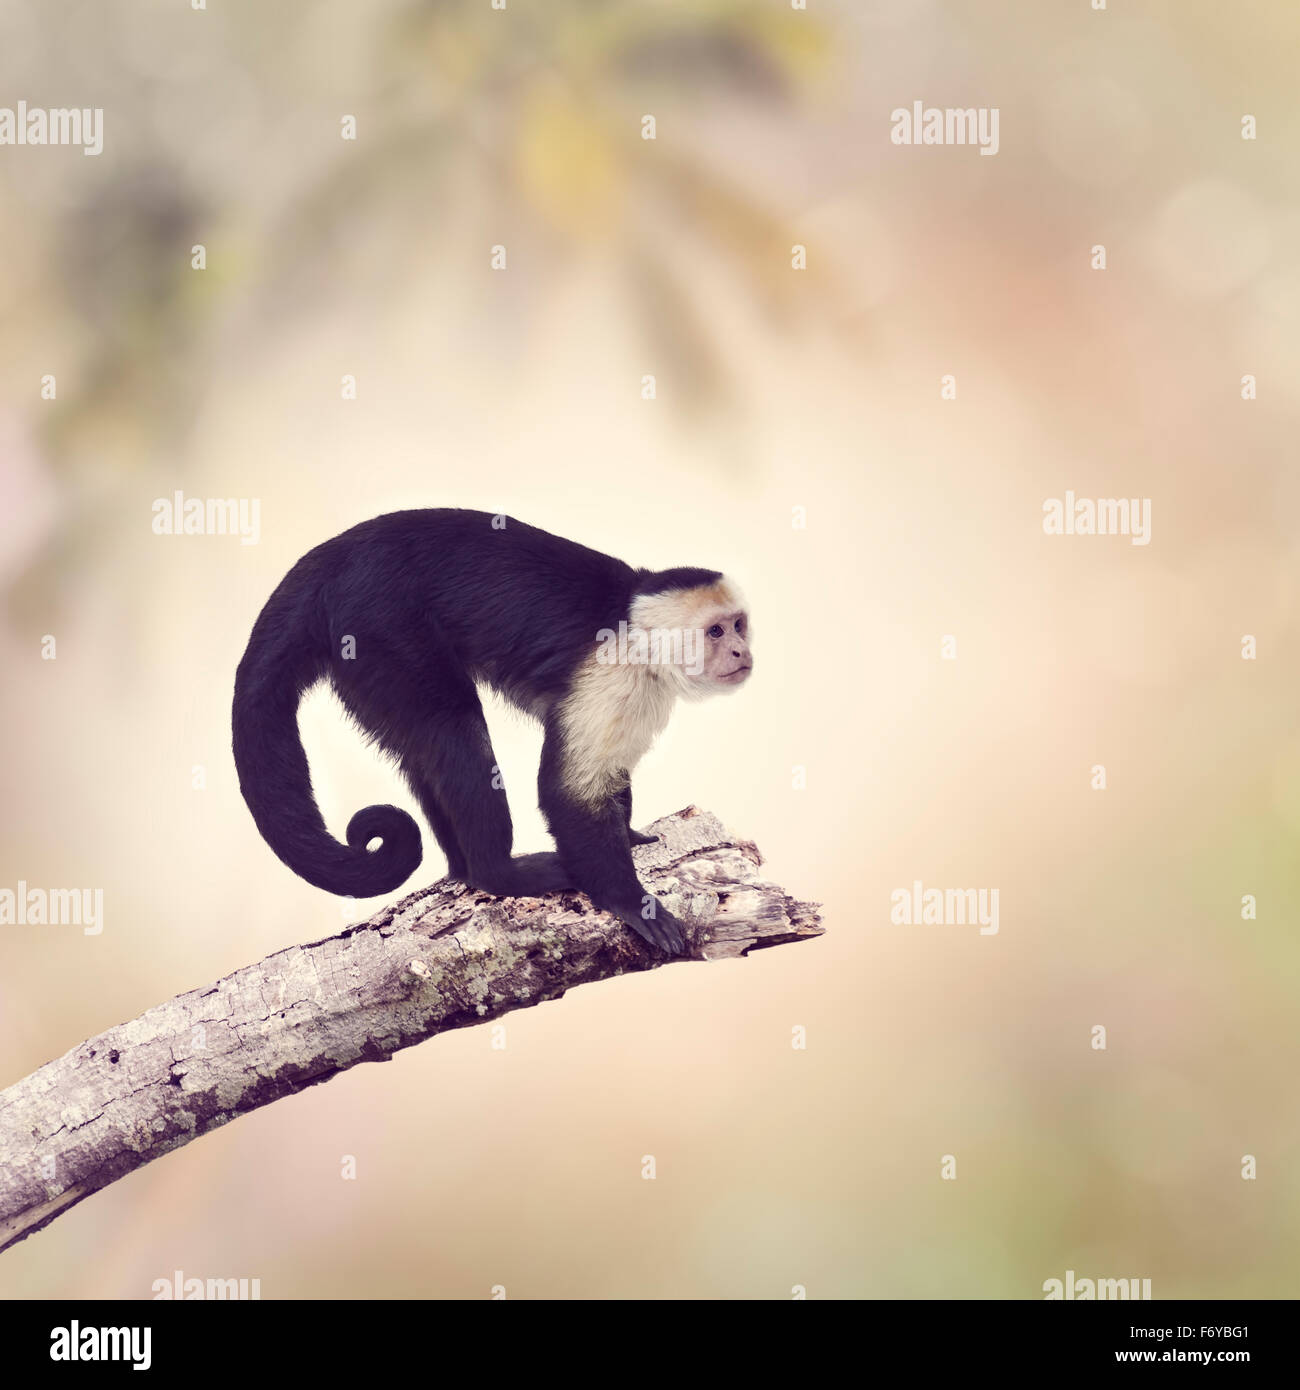 White Throated Capuchin Monkey on a Branch Stock Photo